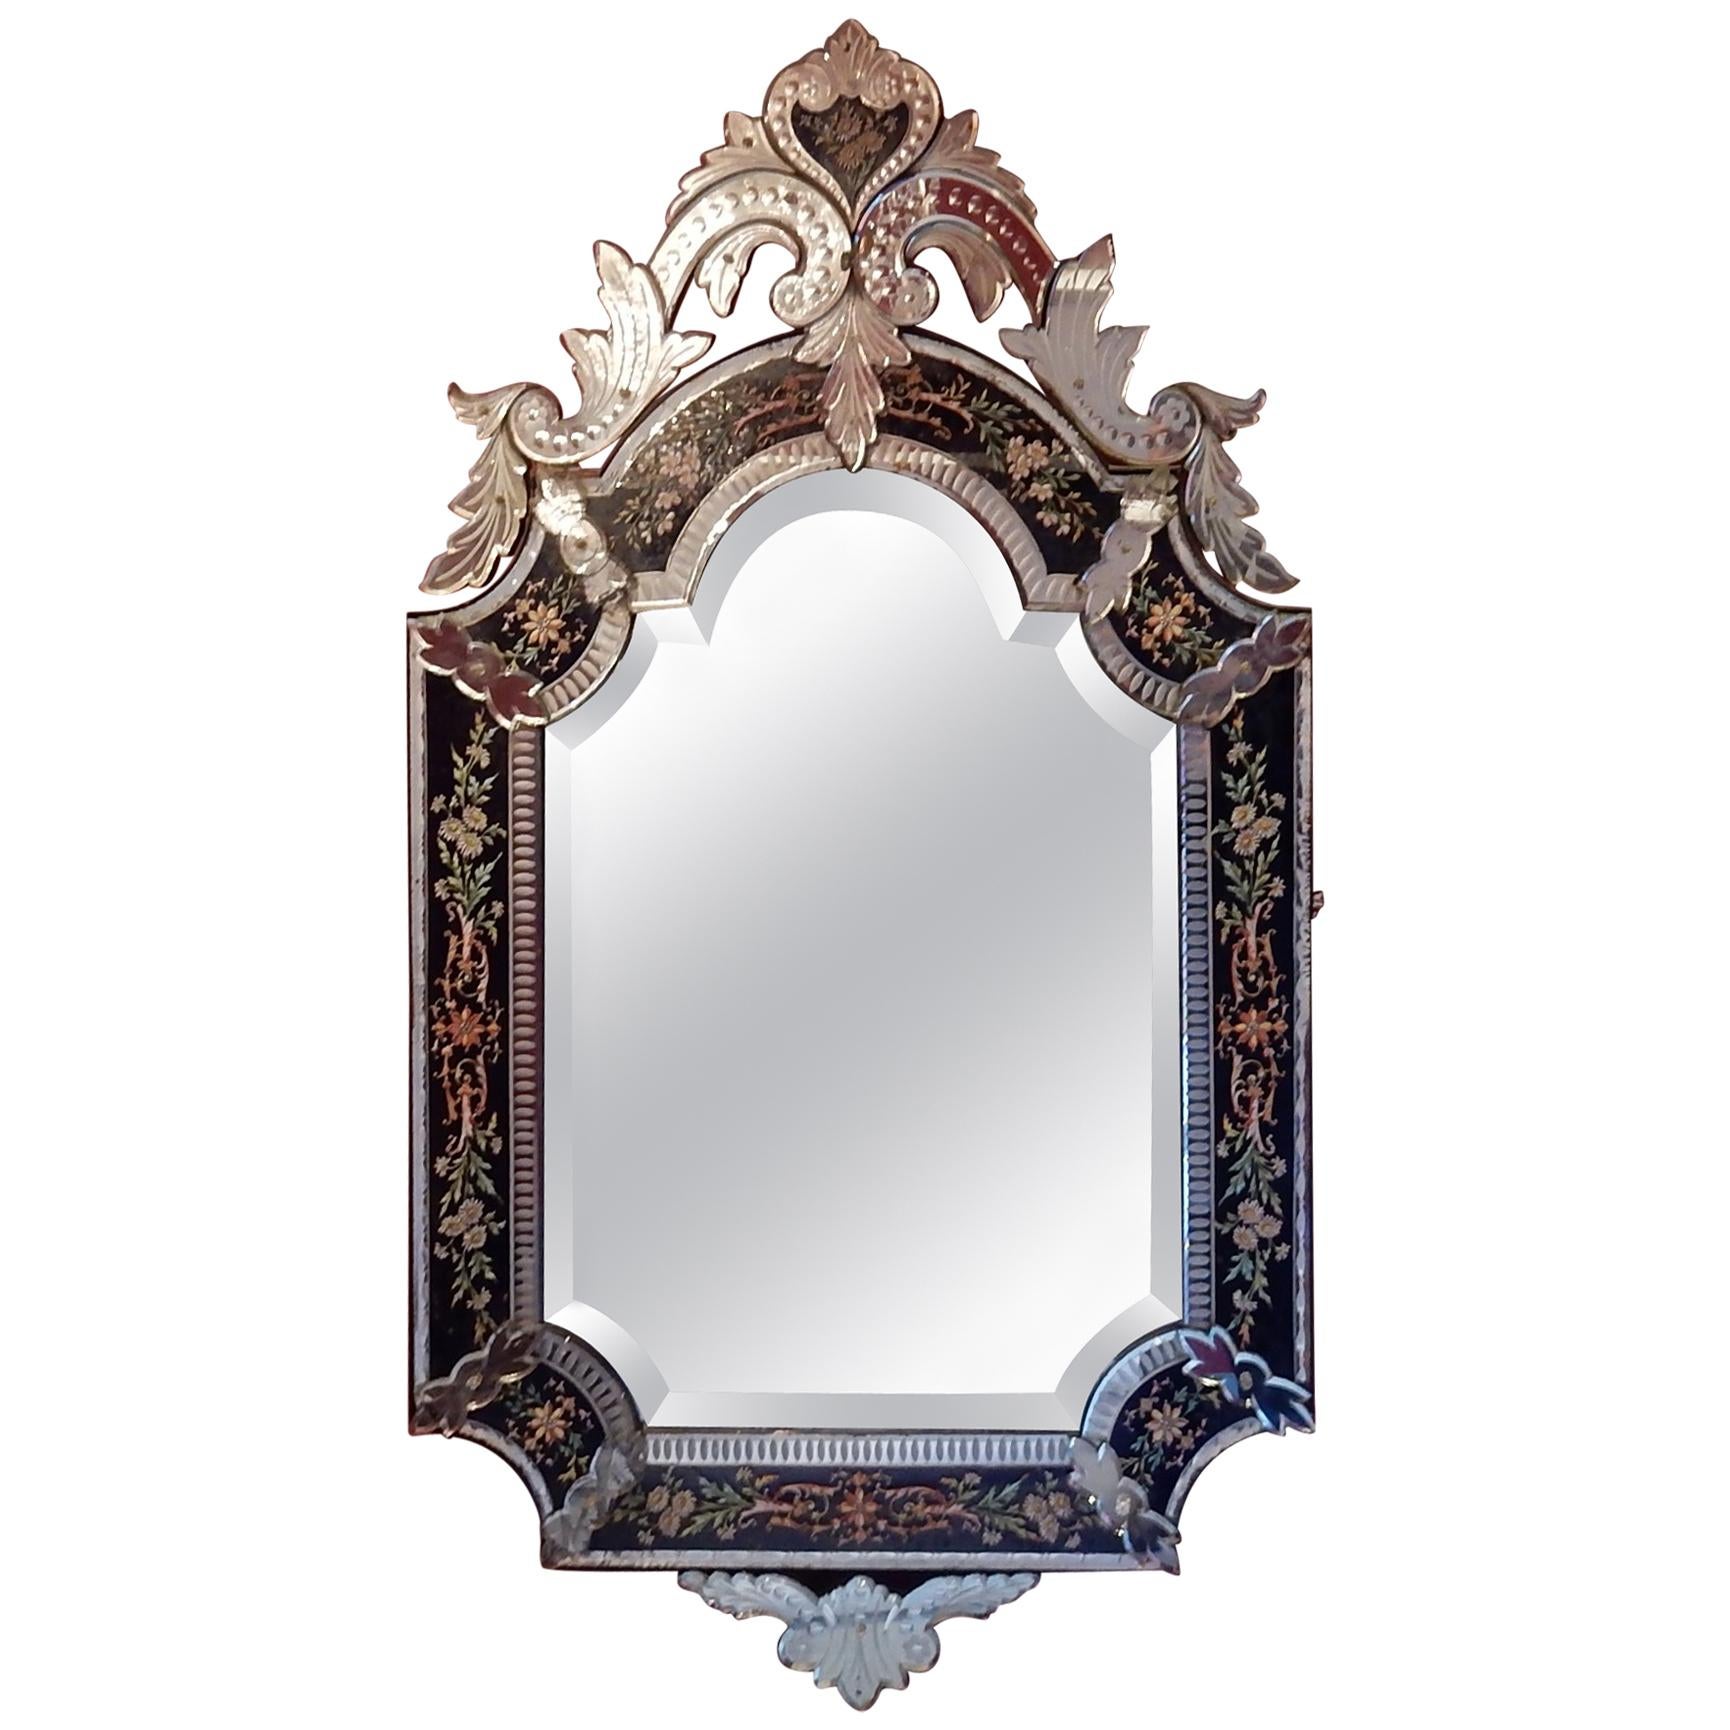 1880-1900 Venetian Mirror N3 with Pediment, Blue Glass Adorned with Flowers